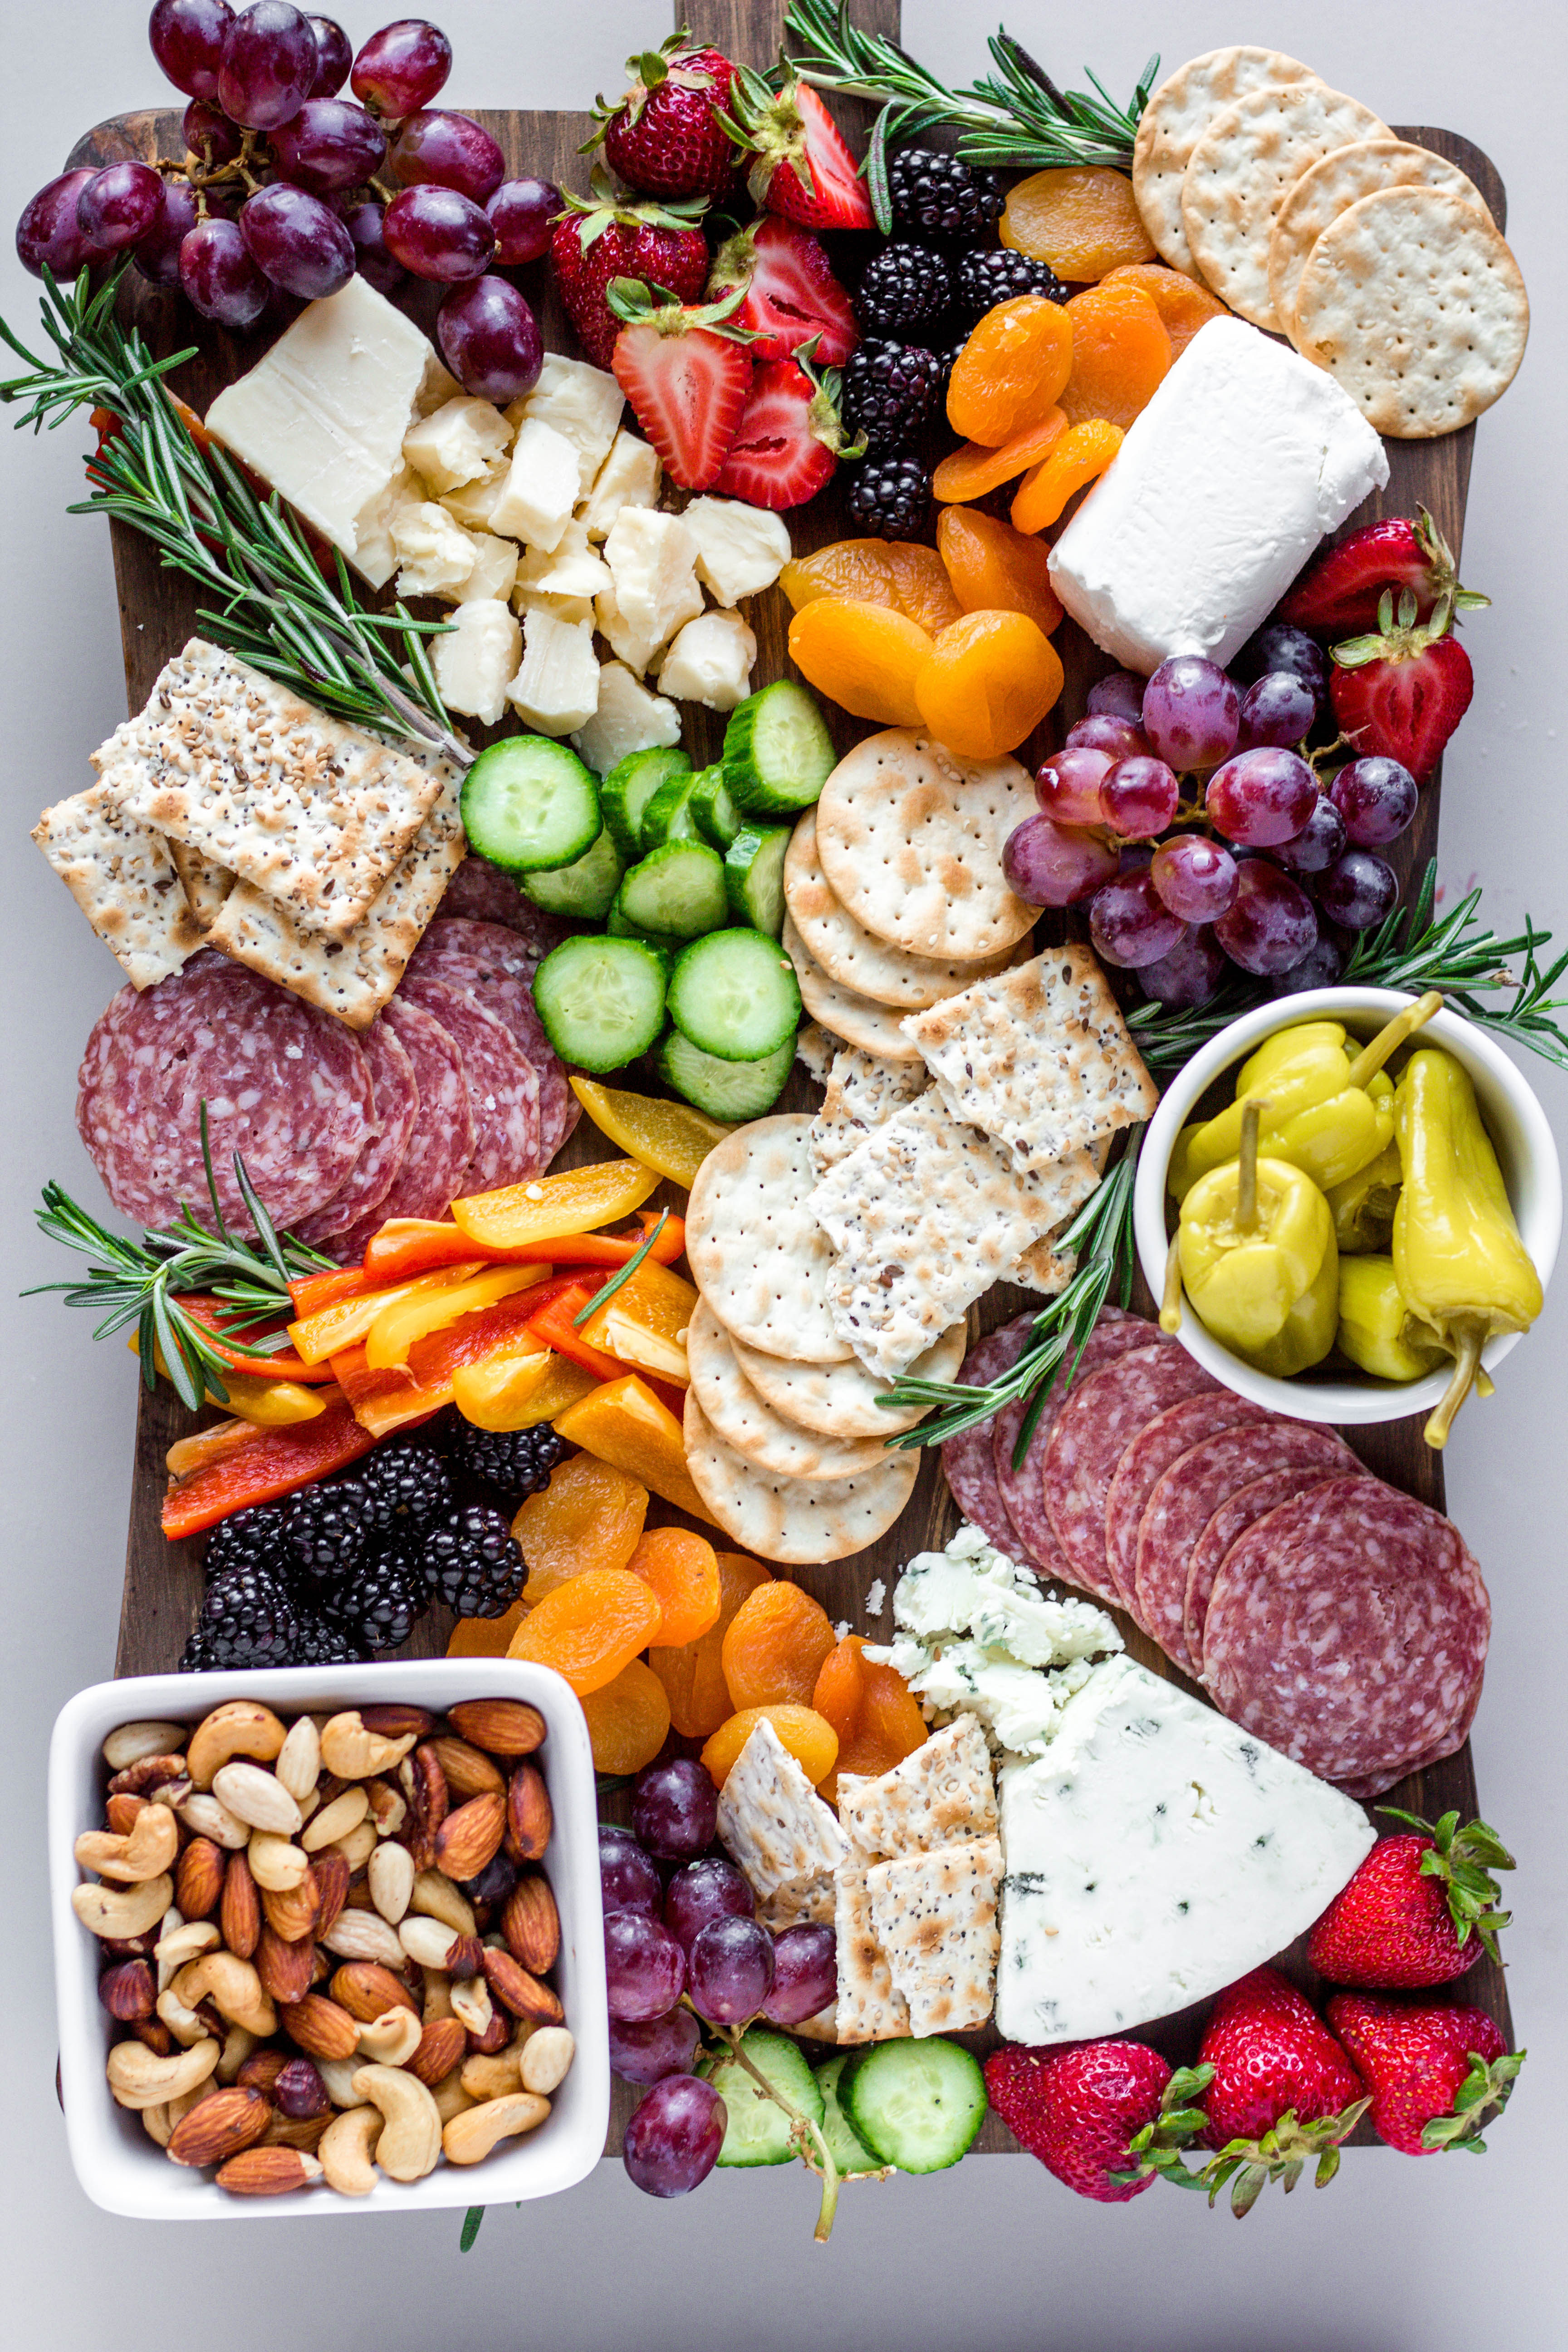 I love a good summer charcuterie board. With fresh produce from farmer's markets and summer BBQs, they are such a simple summer appetizer to put together. Here's how to put together a summer charcuterie board.